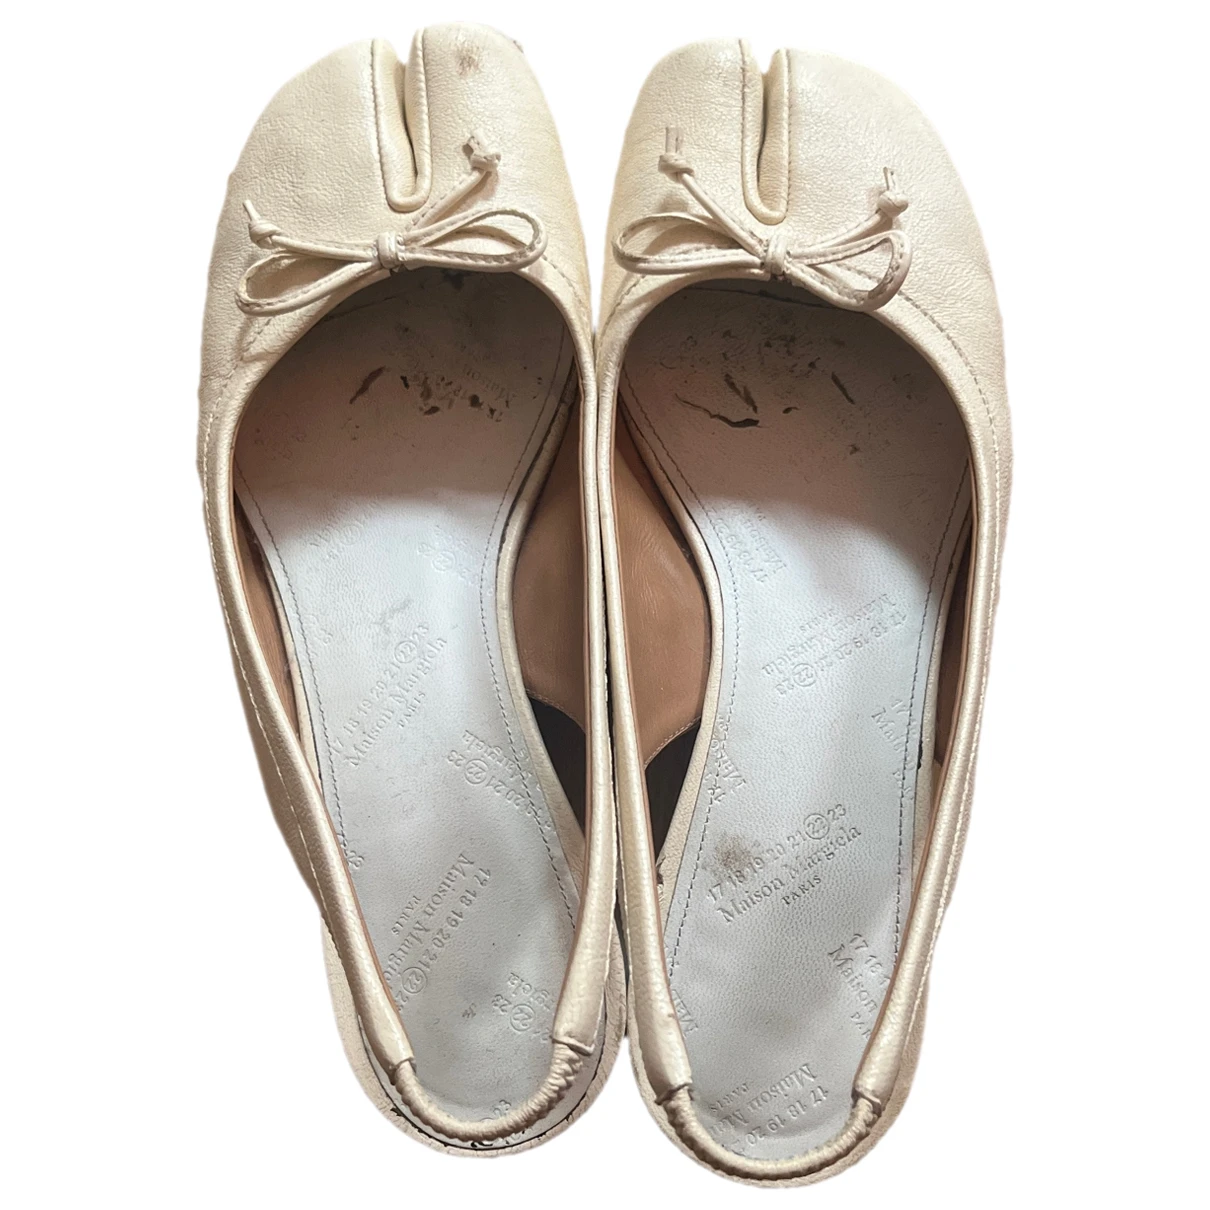 Pre-owned Maison Margiela Leather Ballet Flats In White